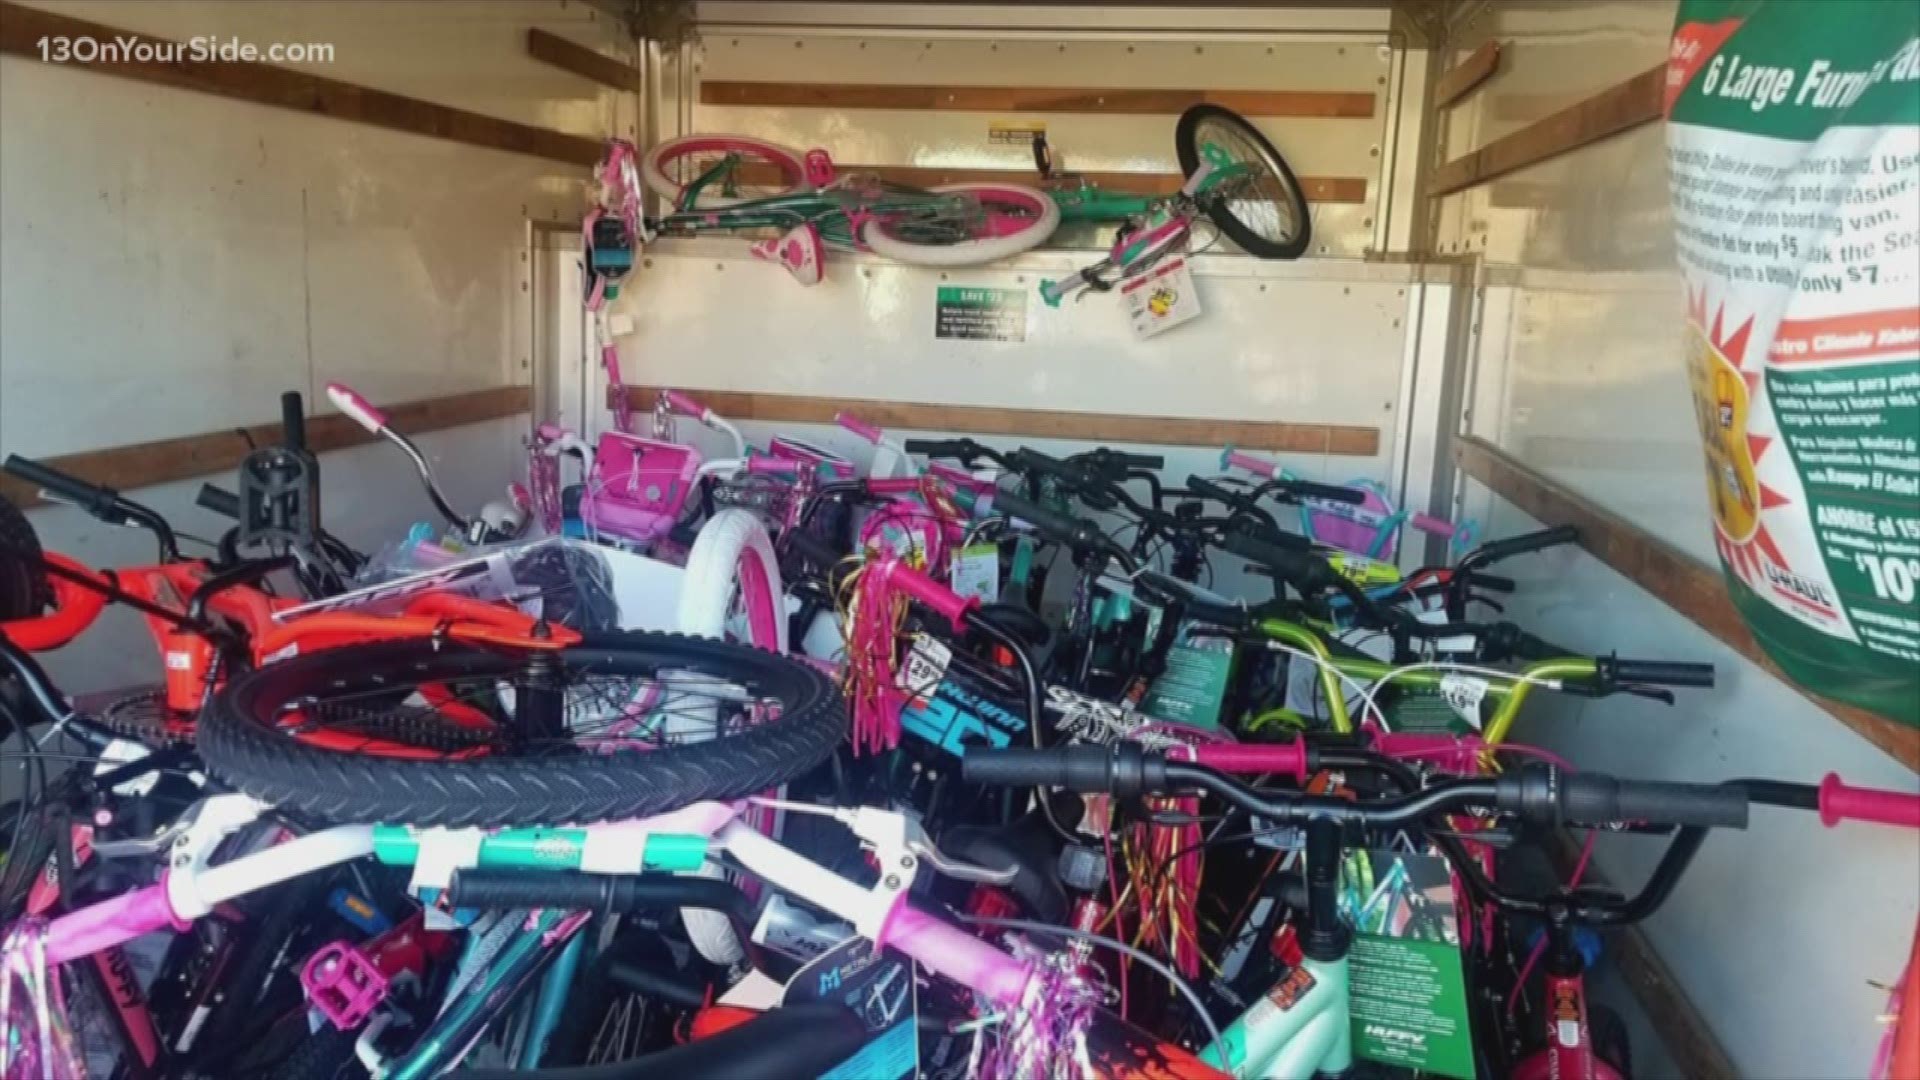 Muskegon dads give away 100 bikes to local kids